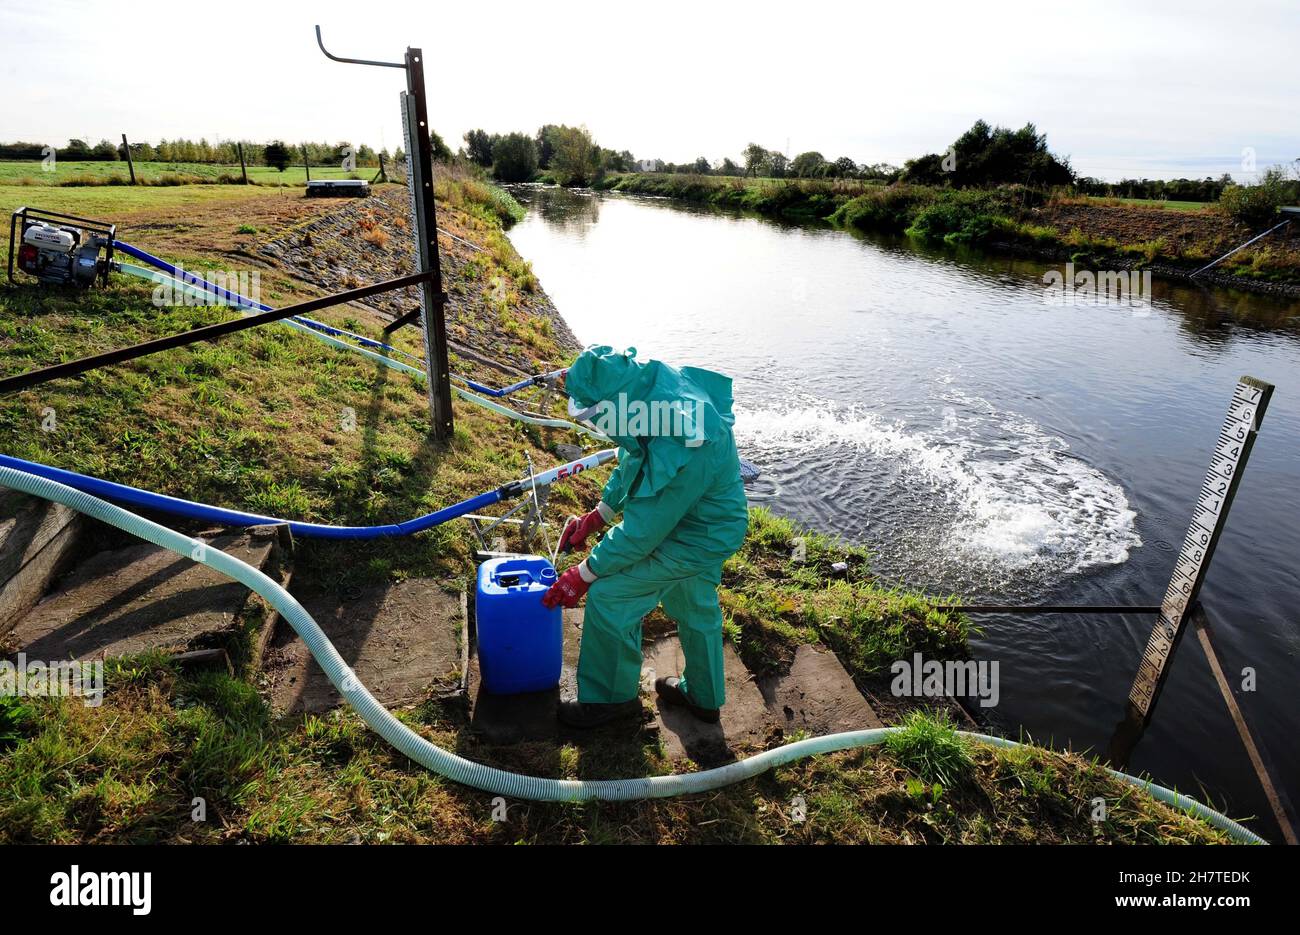 File photo dated 07/10/09 of an Environment Agency worker treating the River Trent at Yoxall, Staffordshire, after it was contaminated with untreated sewage and cyanide. Water companies in England and Wales issued more than 5,500 alerts of sewage being discharged into coastal waters in the last year, a report says. Stock Photo